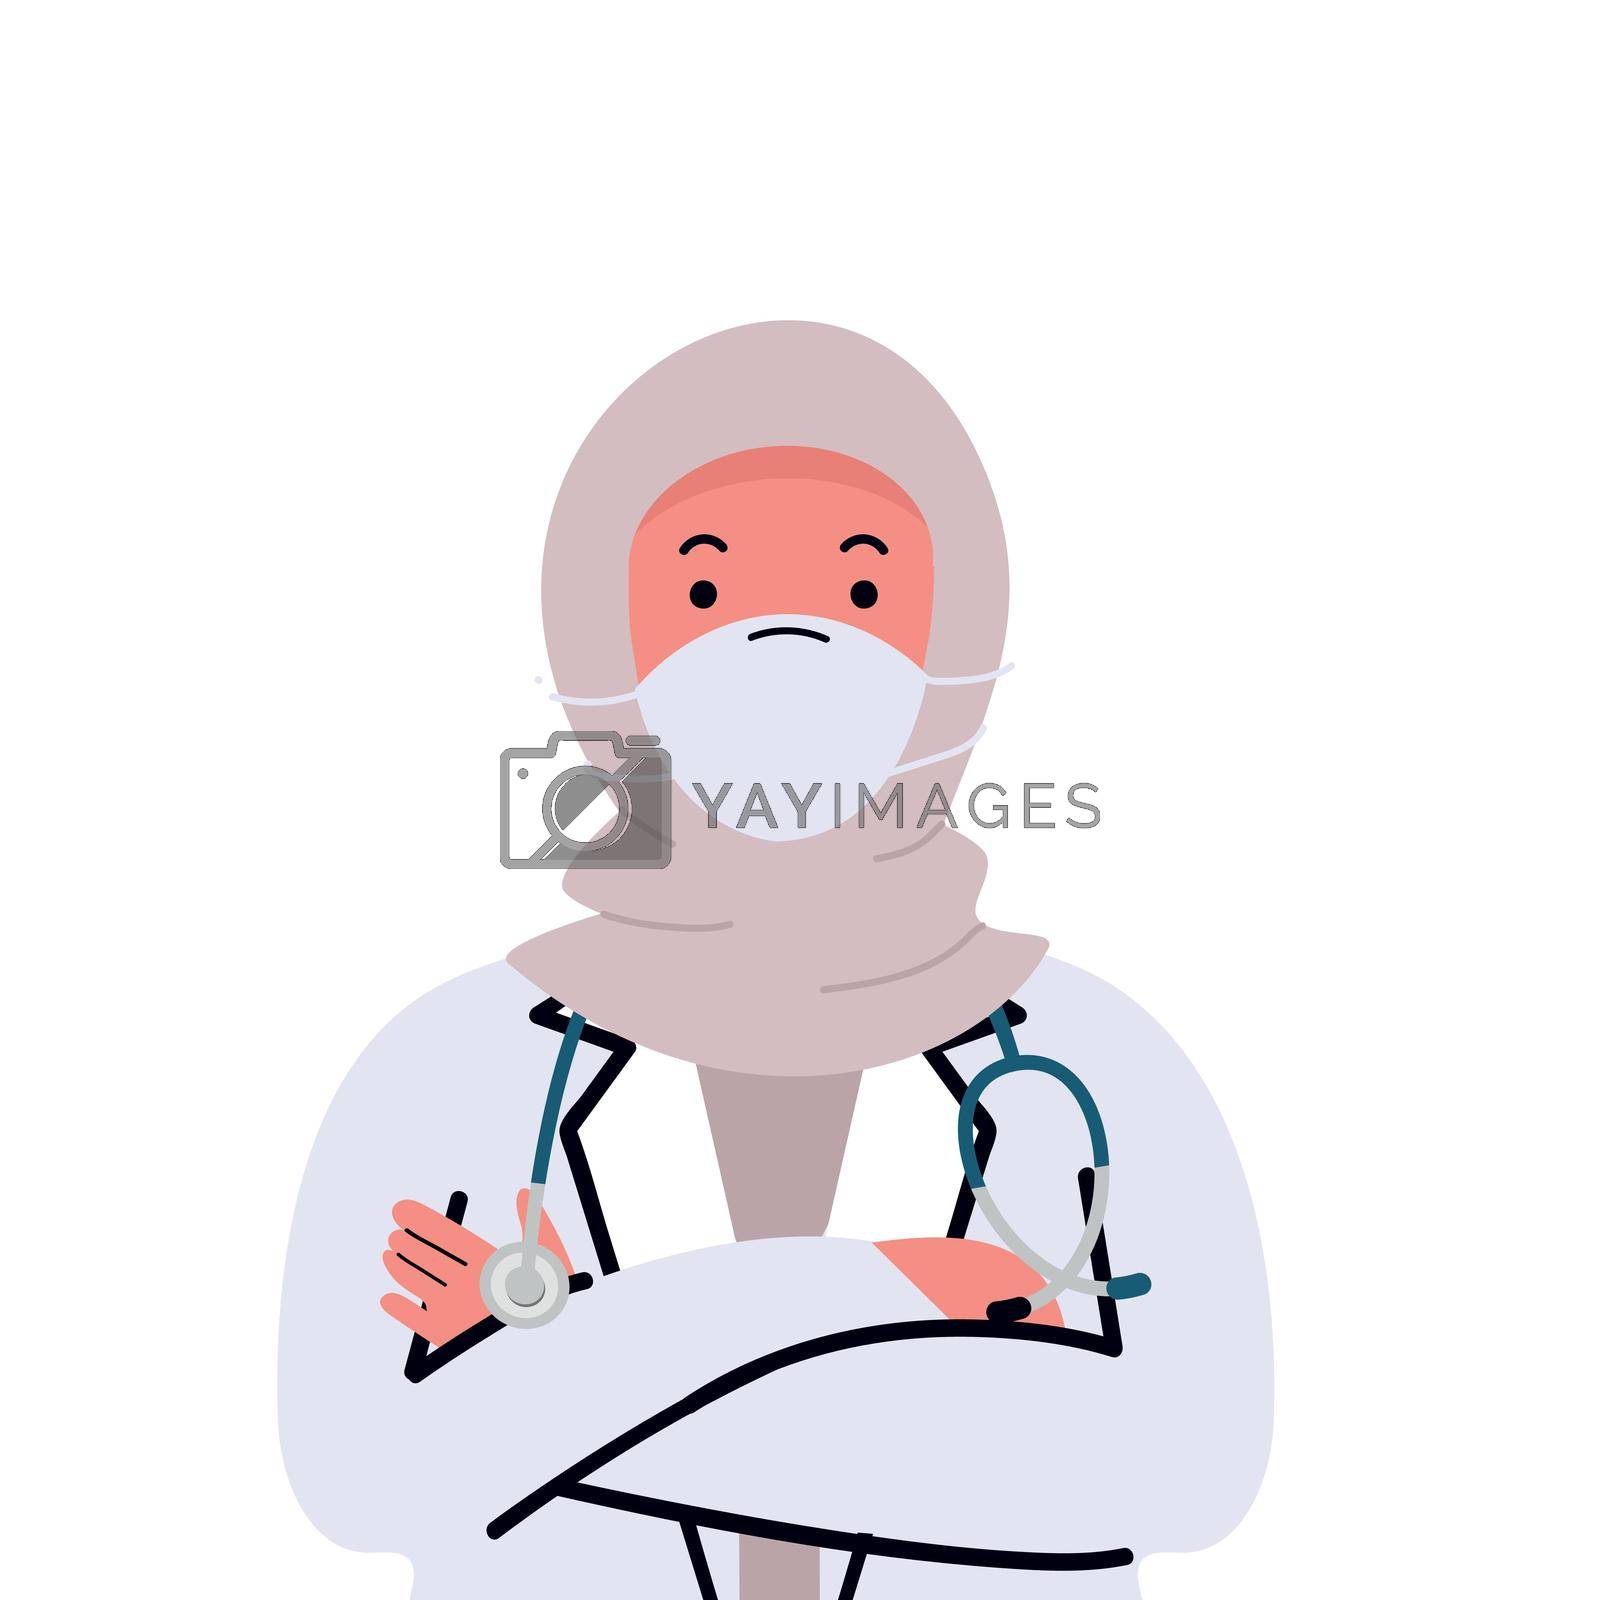 Royalty free image of female arab doctor  with stethoscope Medical  by focus_bell